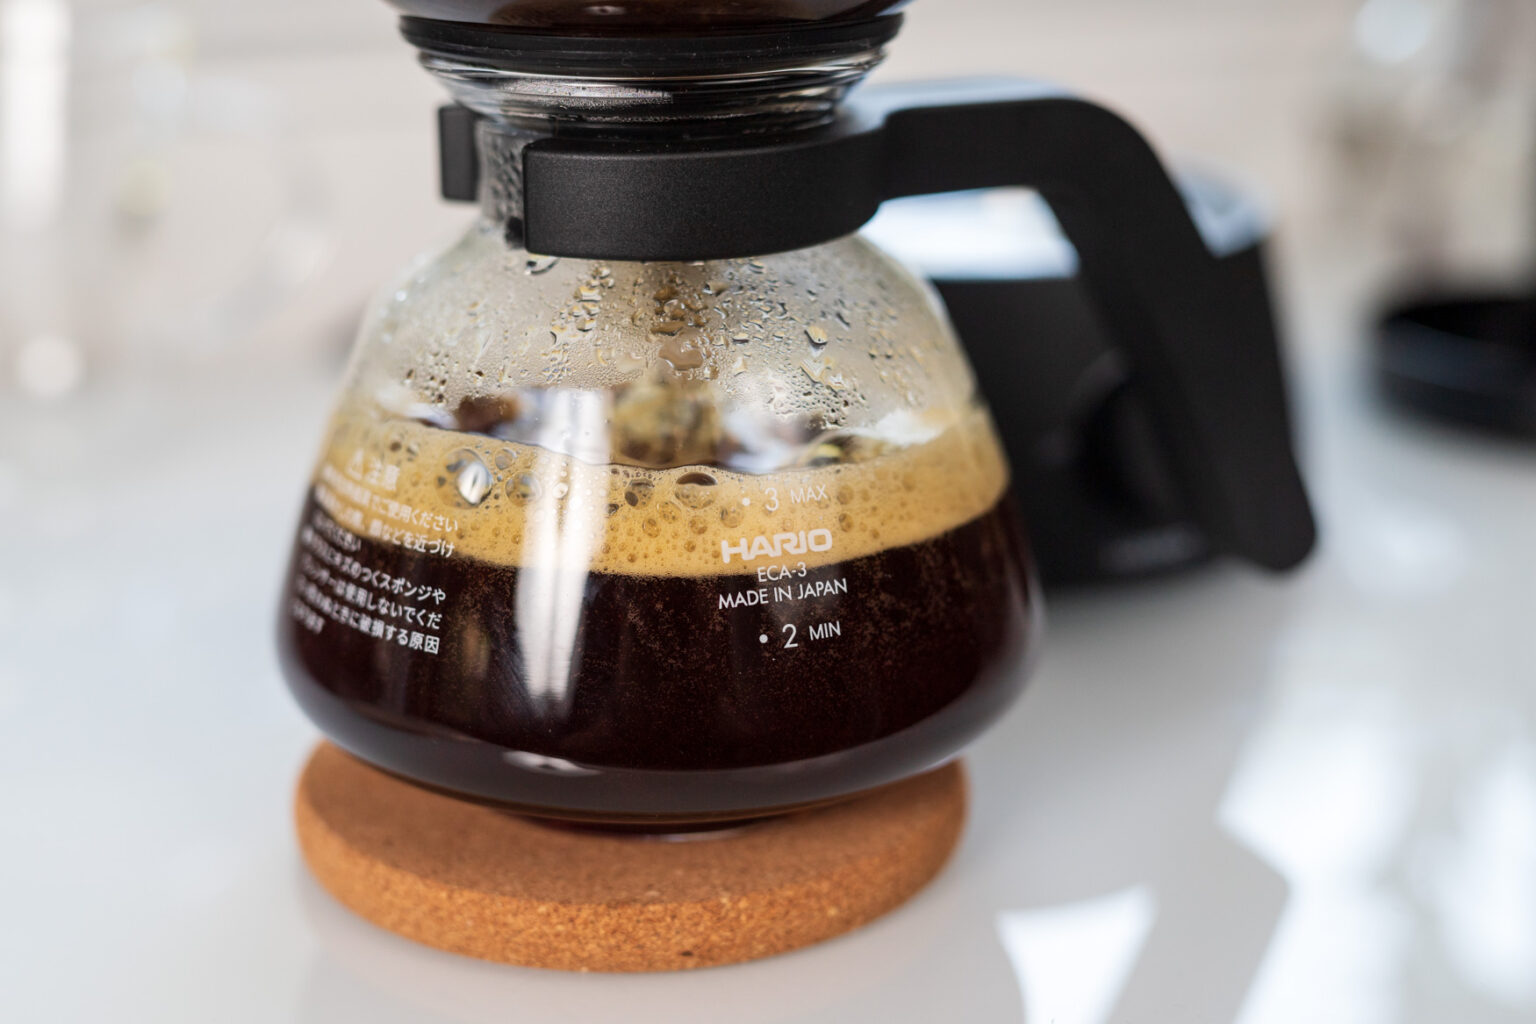 You know the brewing is complete on a siphon when air is drawn through the spent coffee, foam and agitating the finished brew.